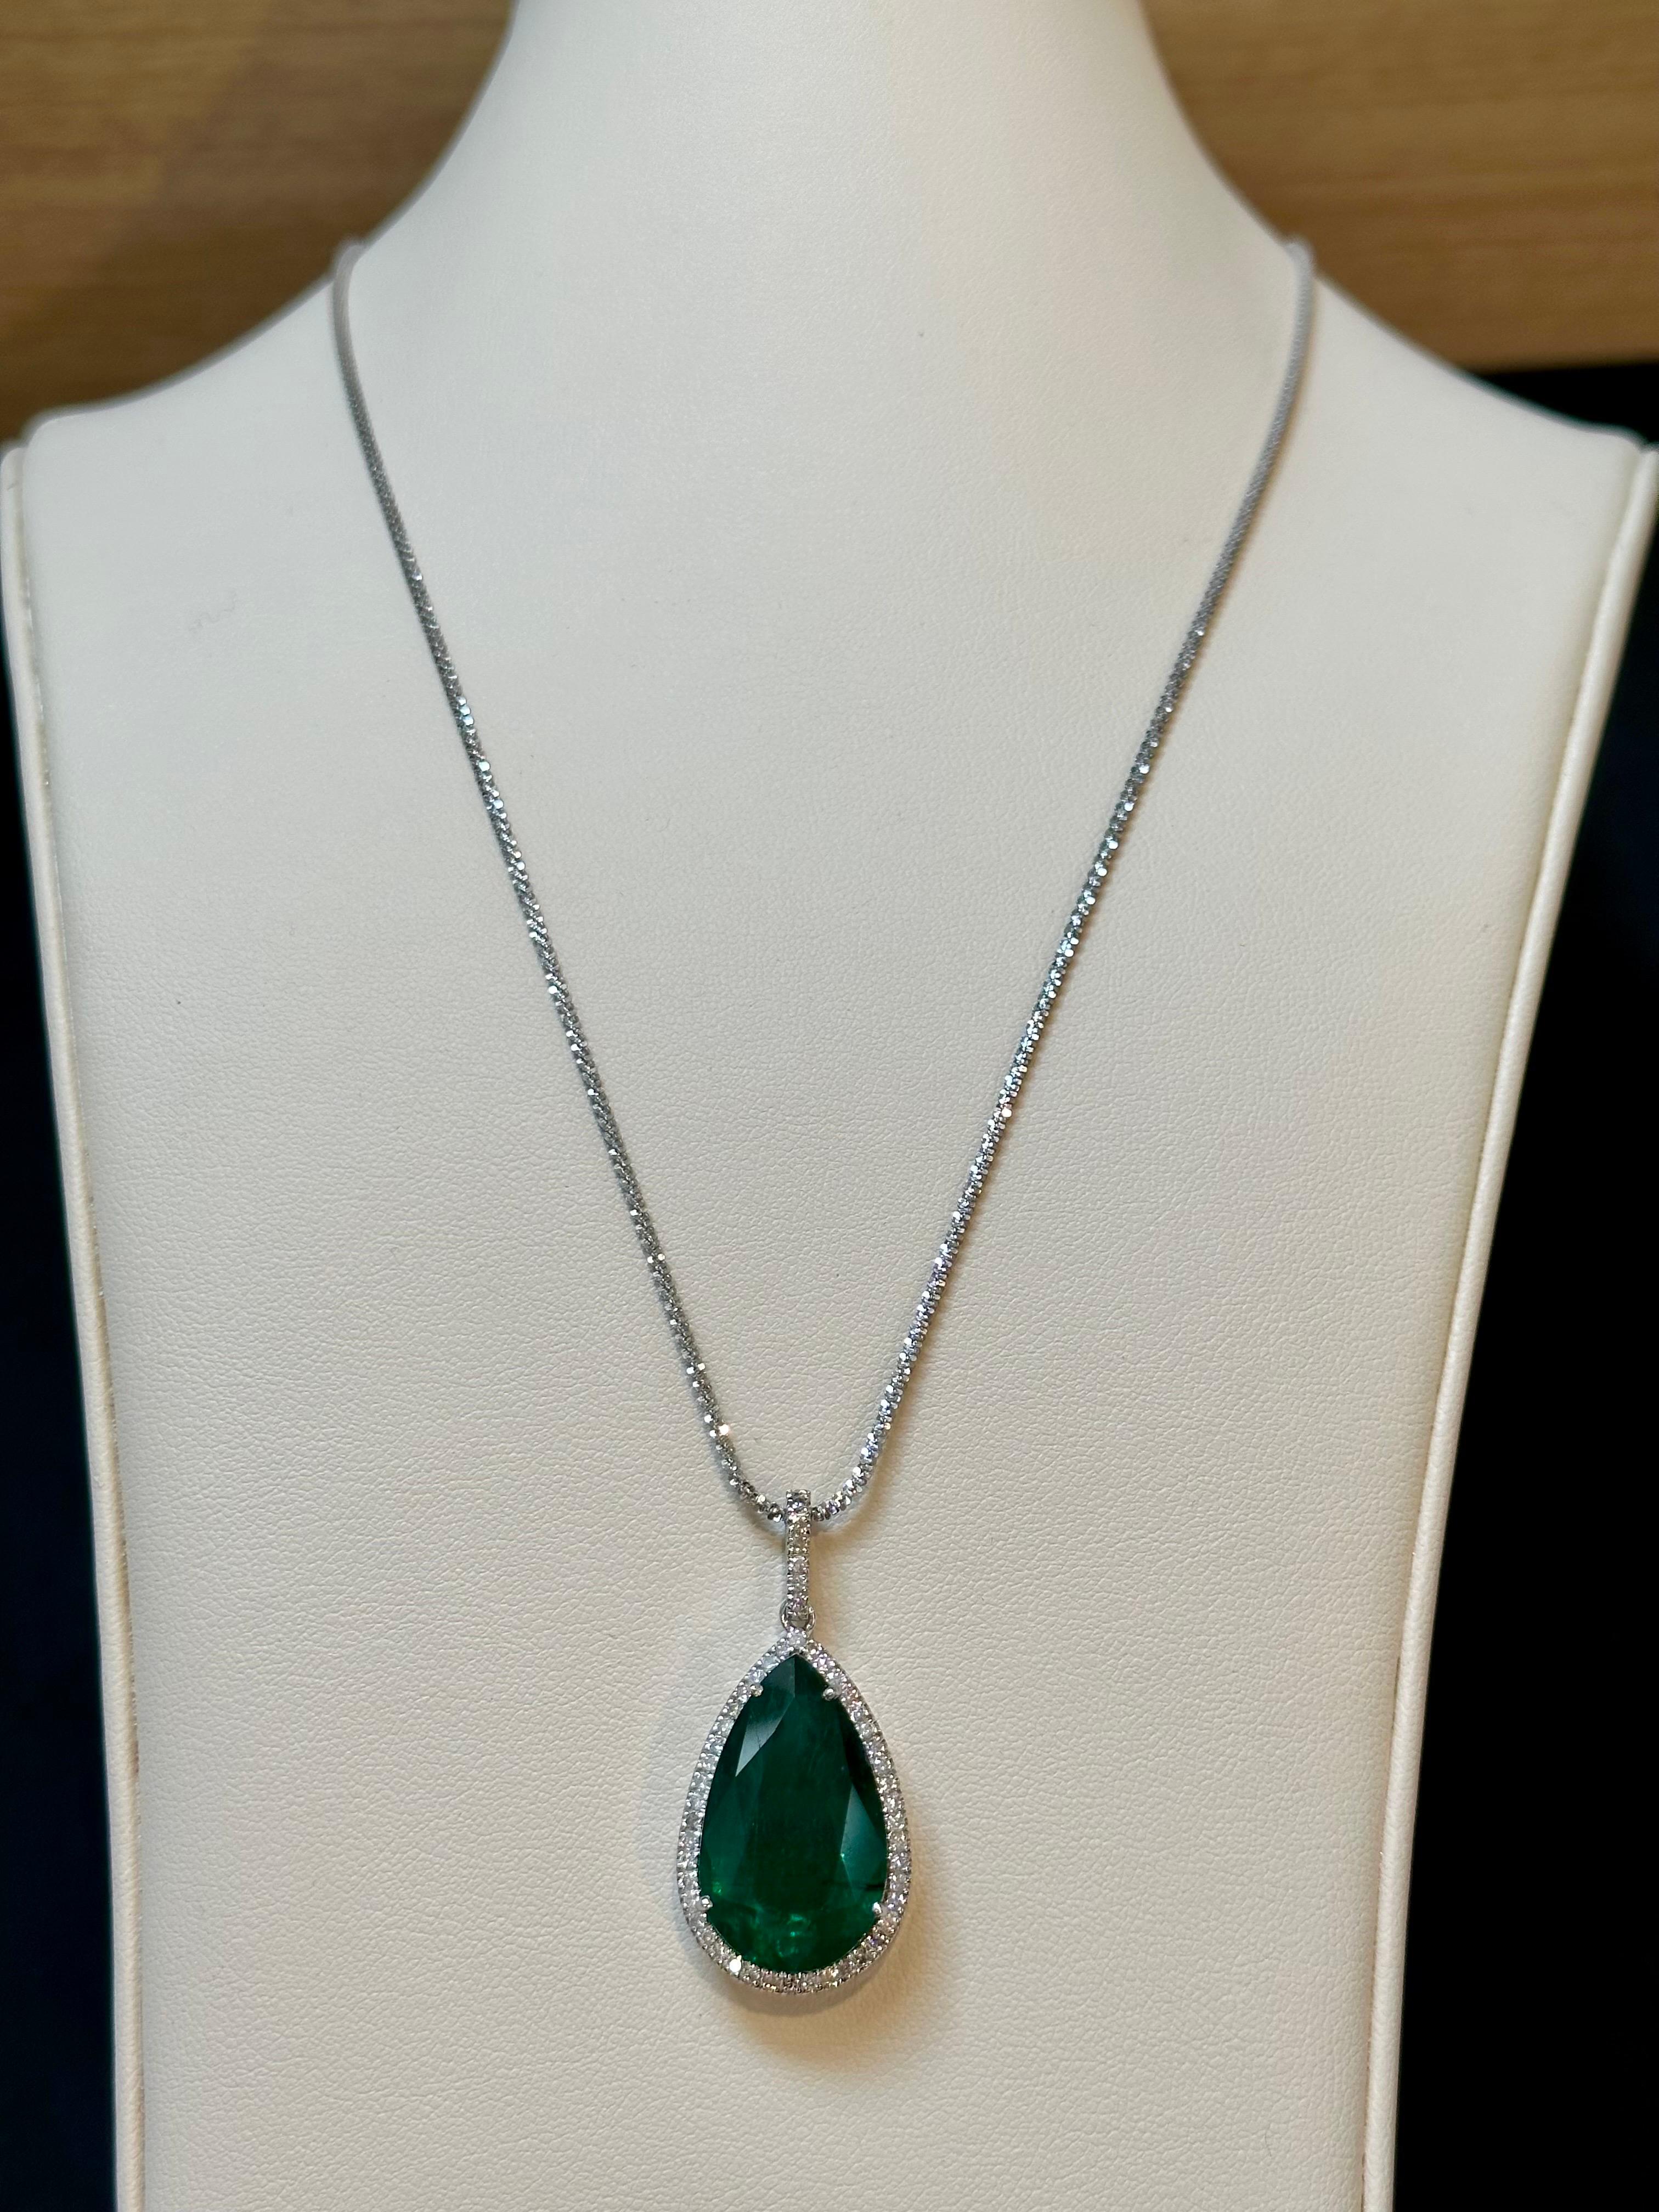 19 Ct Pear Cut Emerald & 1 Ct Diamond Halo Pendent/Necklace 14 KW Gold Chain For Sale 8